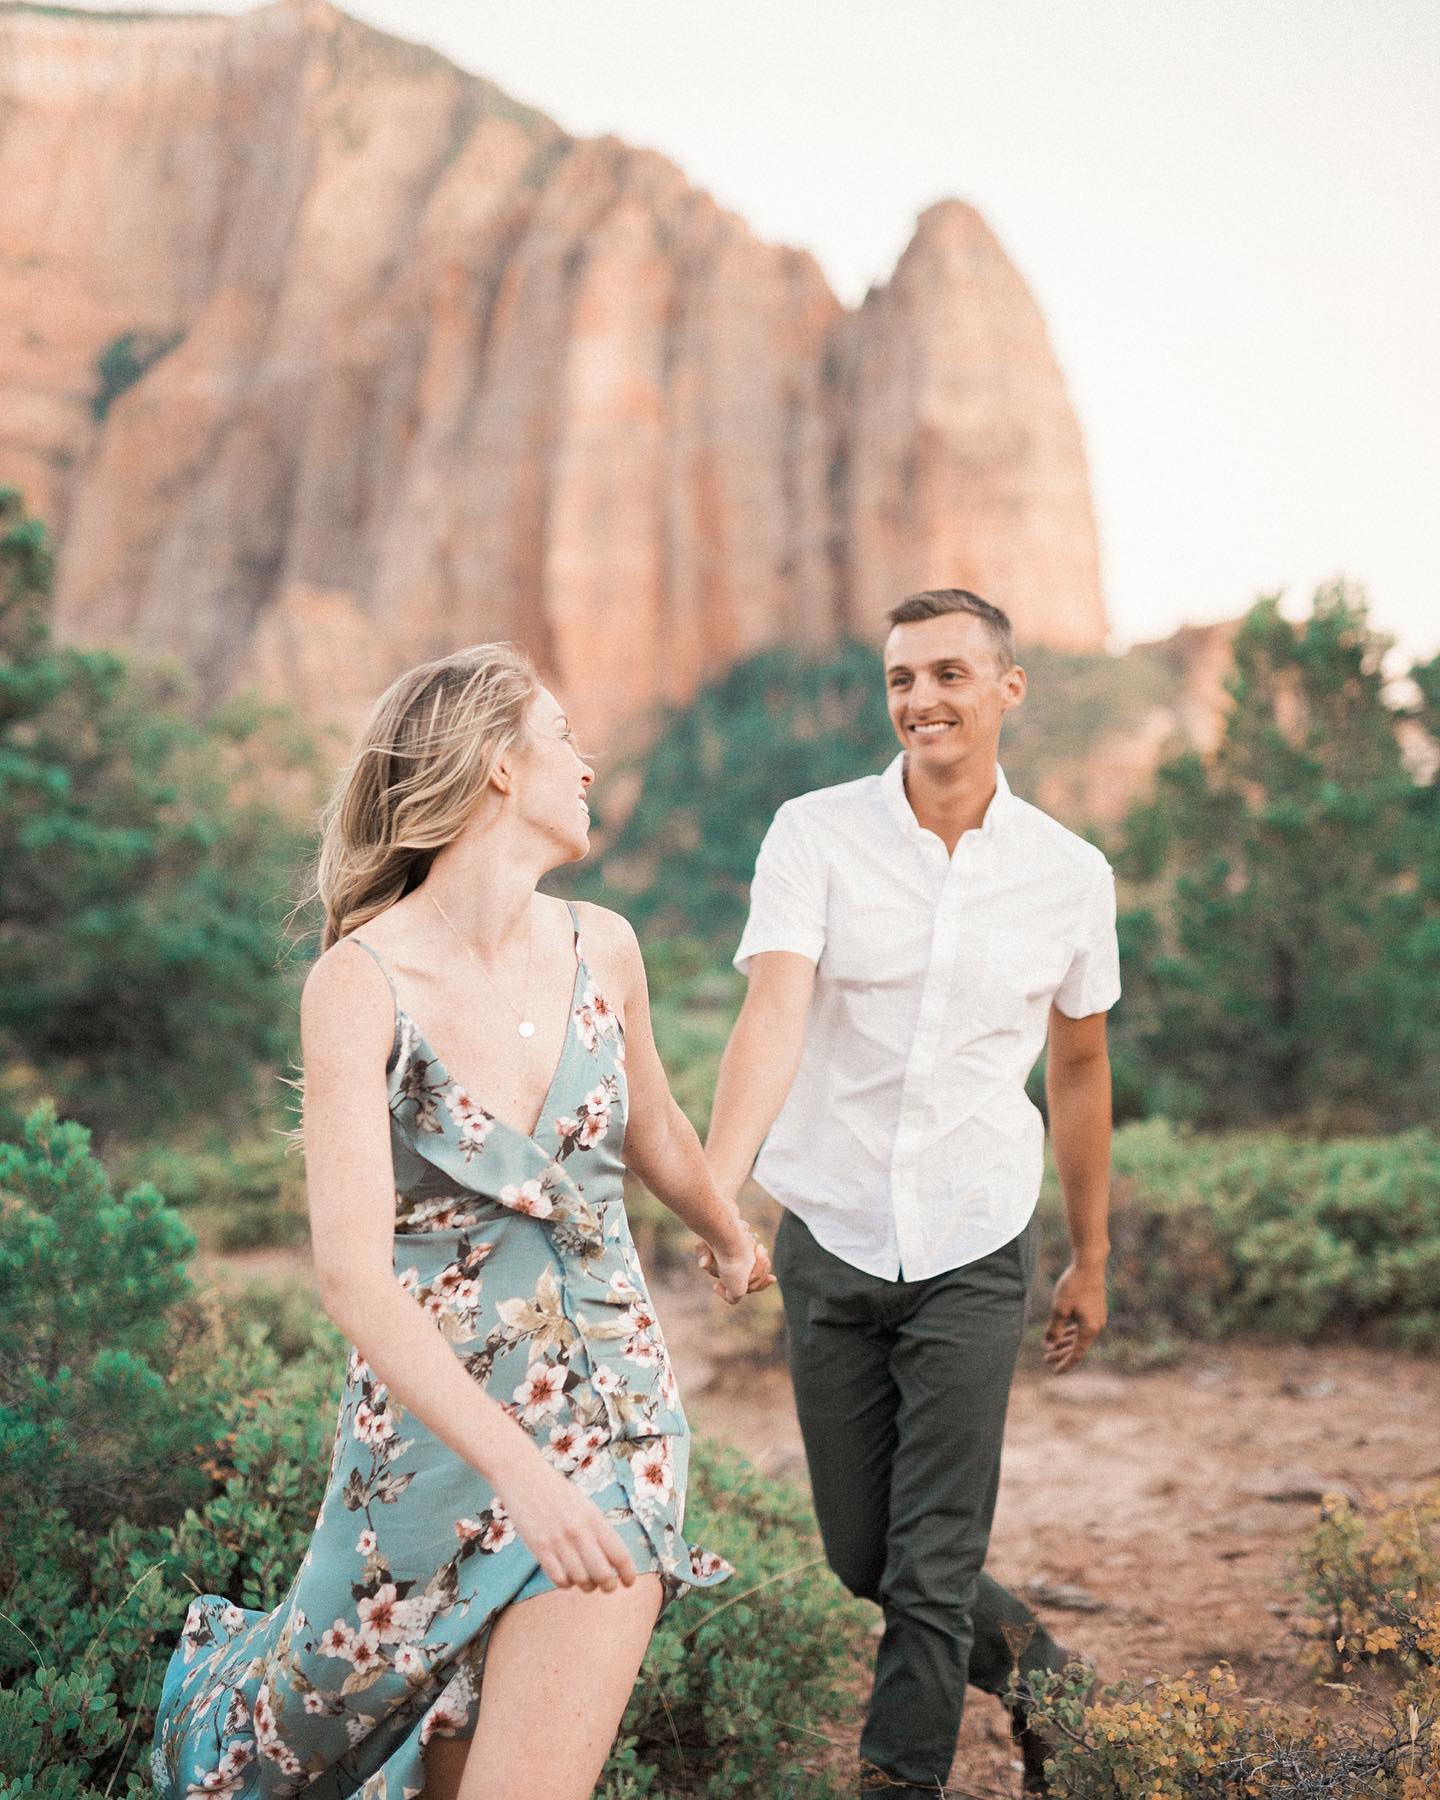 8 Outfit Ideas for Summer Engagement Photos | Junebug Weddings | Engagement  outfits summer, Engagement photo outfits, Summer engagement photos